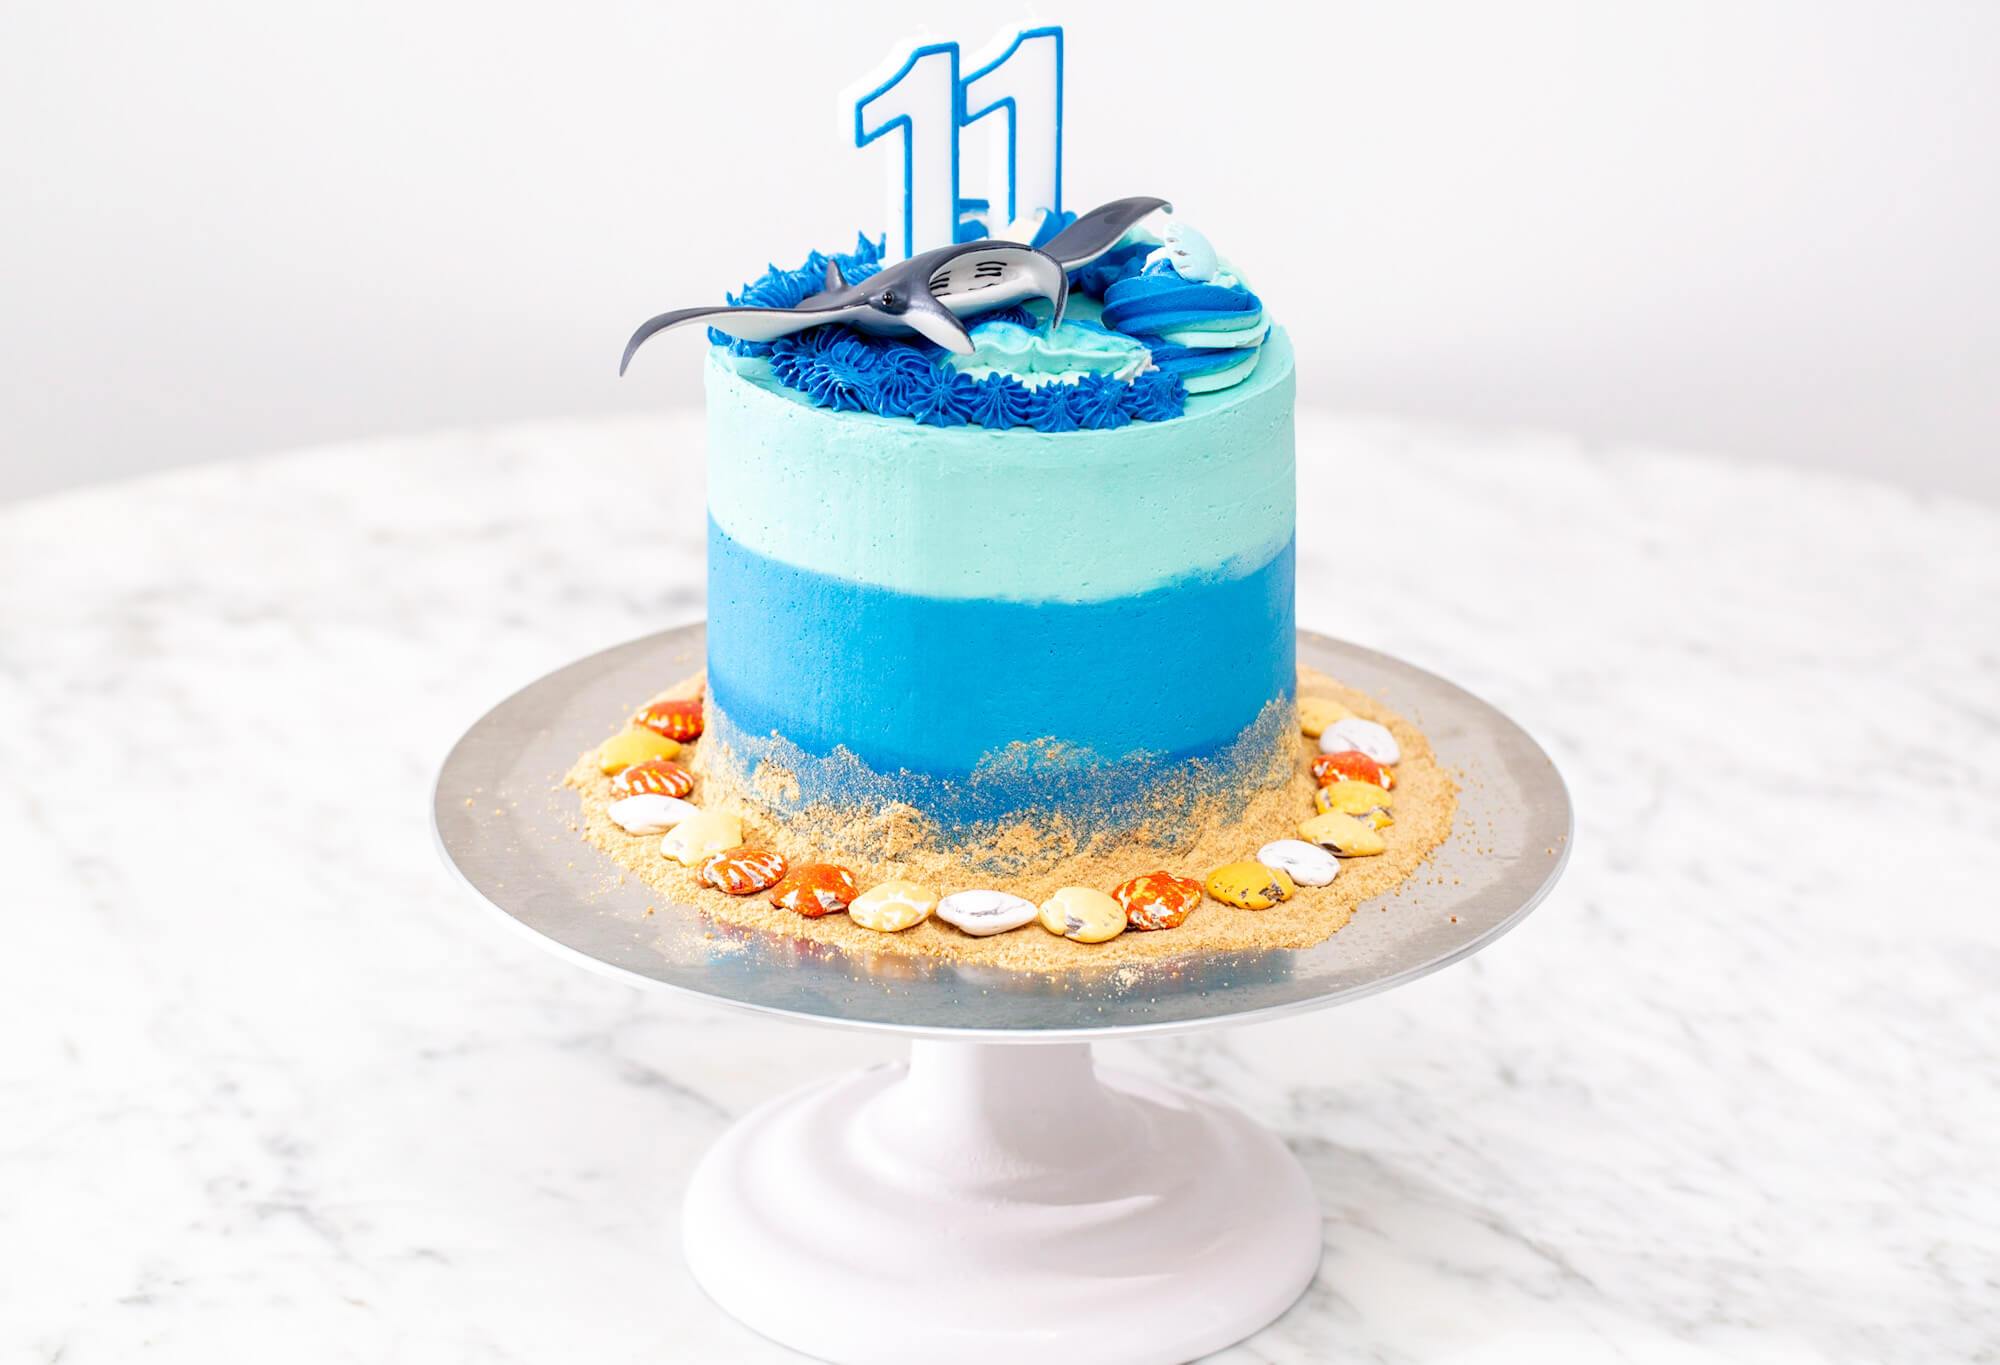 A blue cake decorated with an underwater theme featuring chocolate shells, graham crumb sand and a toy manta ray